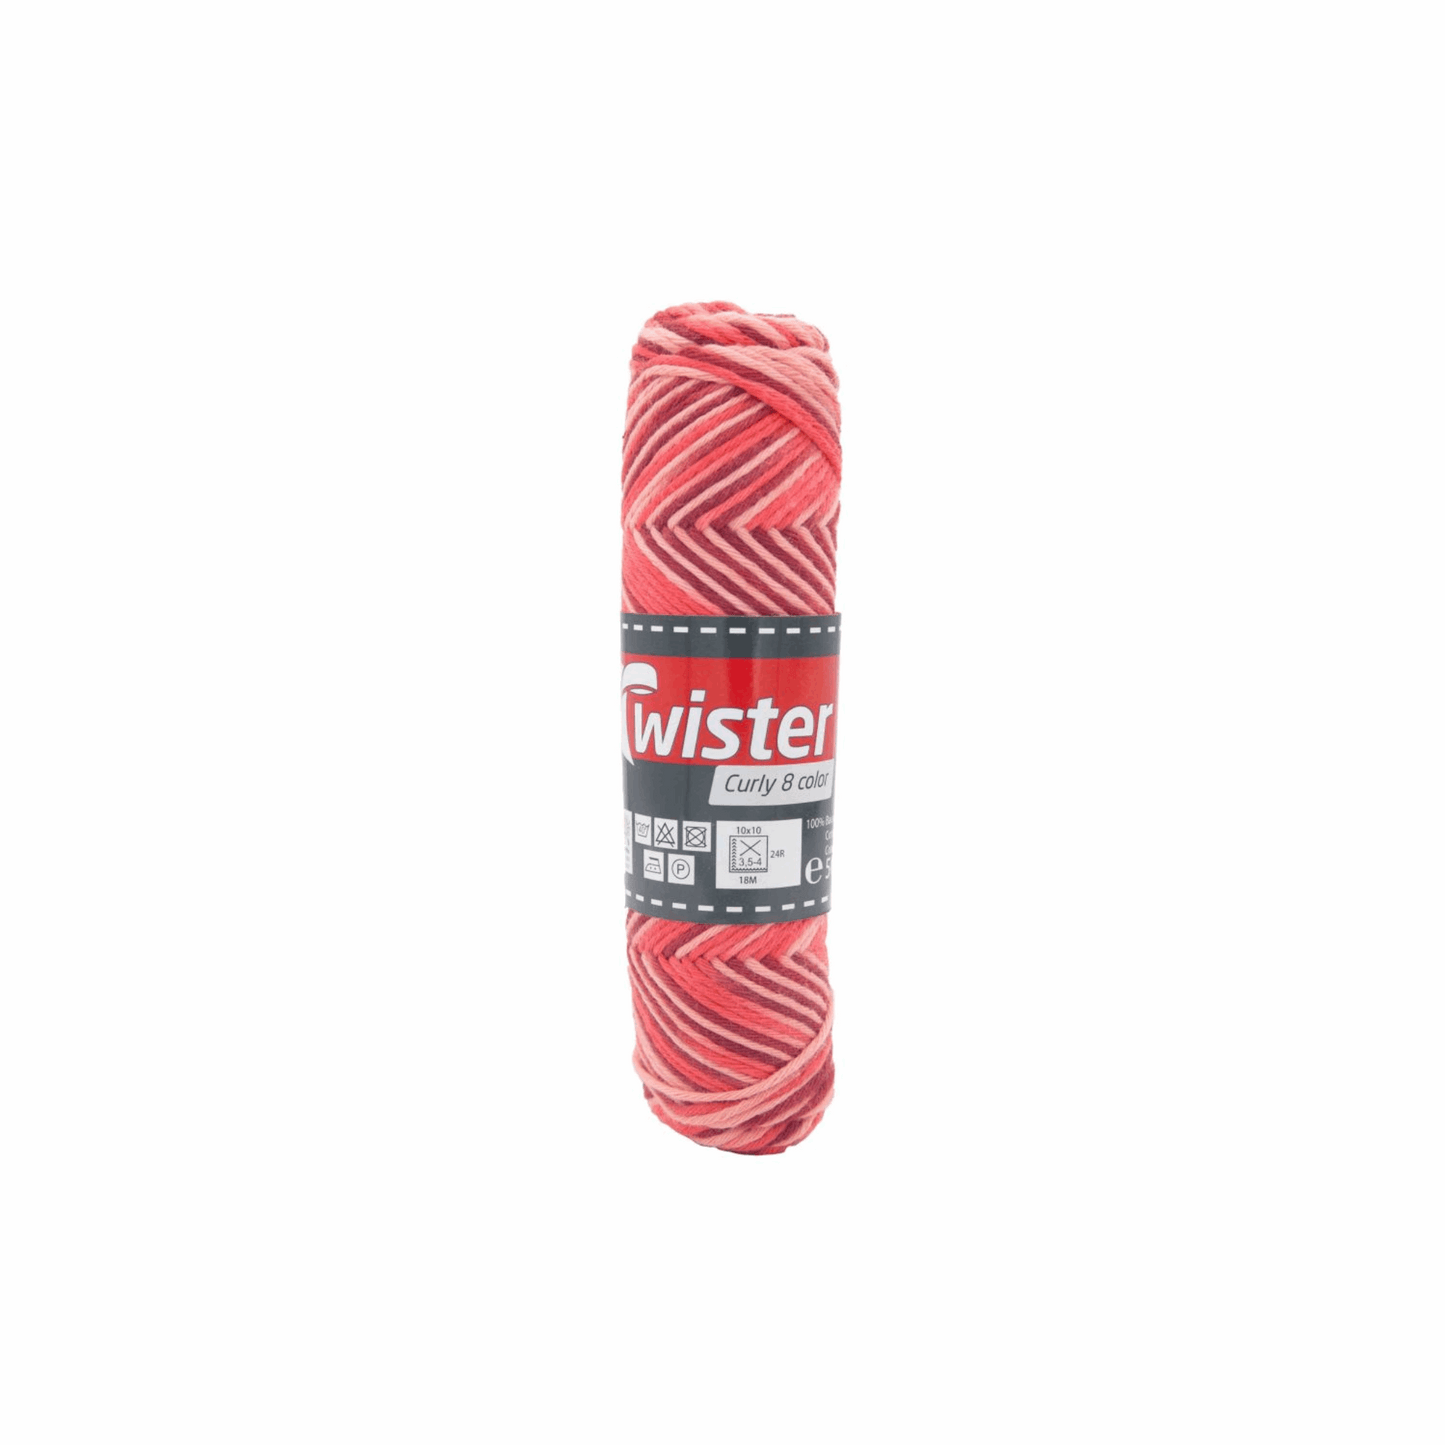 Twister Curly 8fädig, 50g, 98355, Farbe aprrikot rot weinrot 103